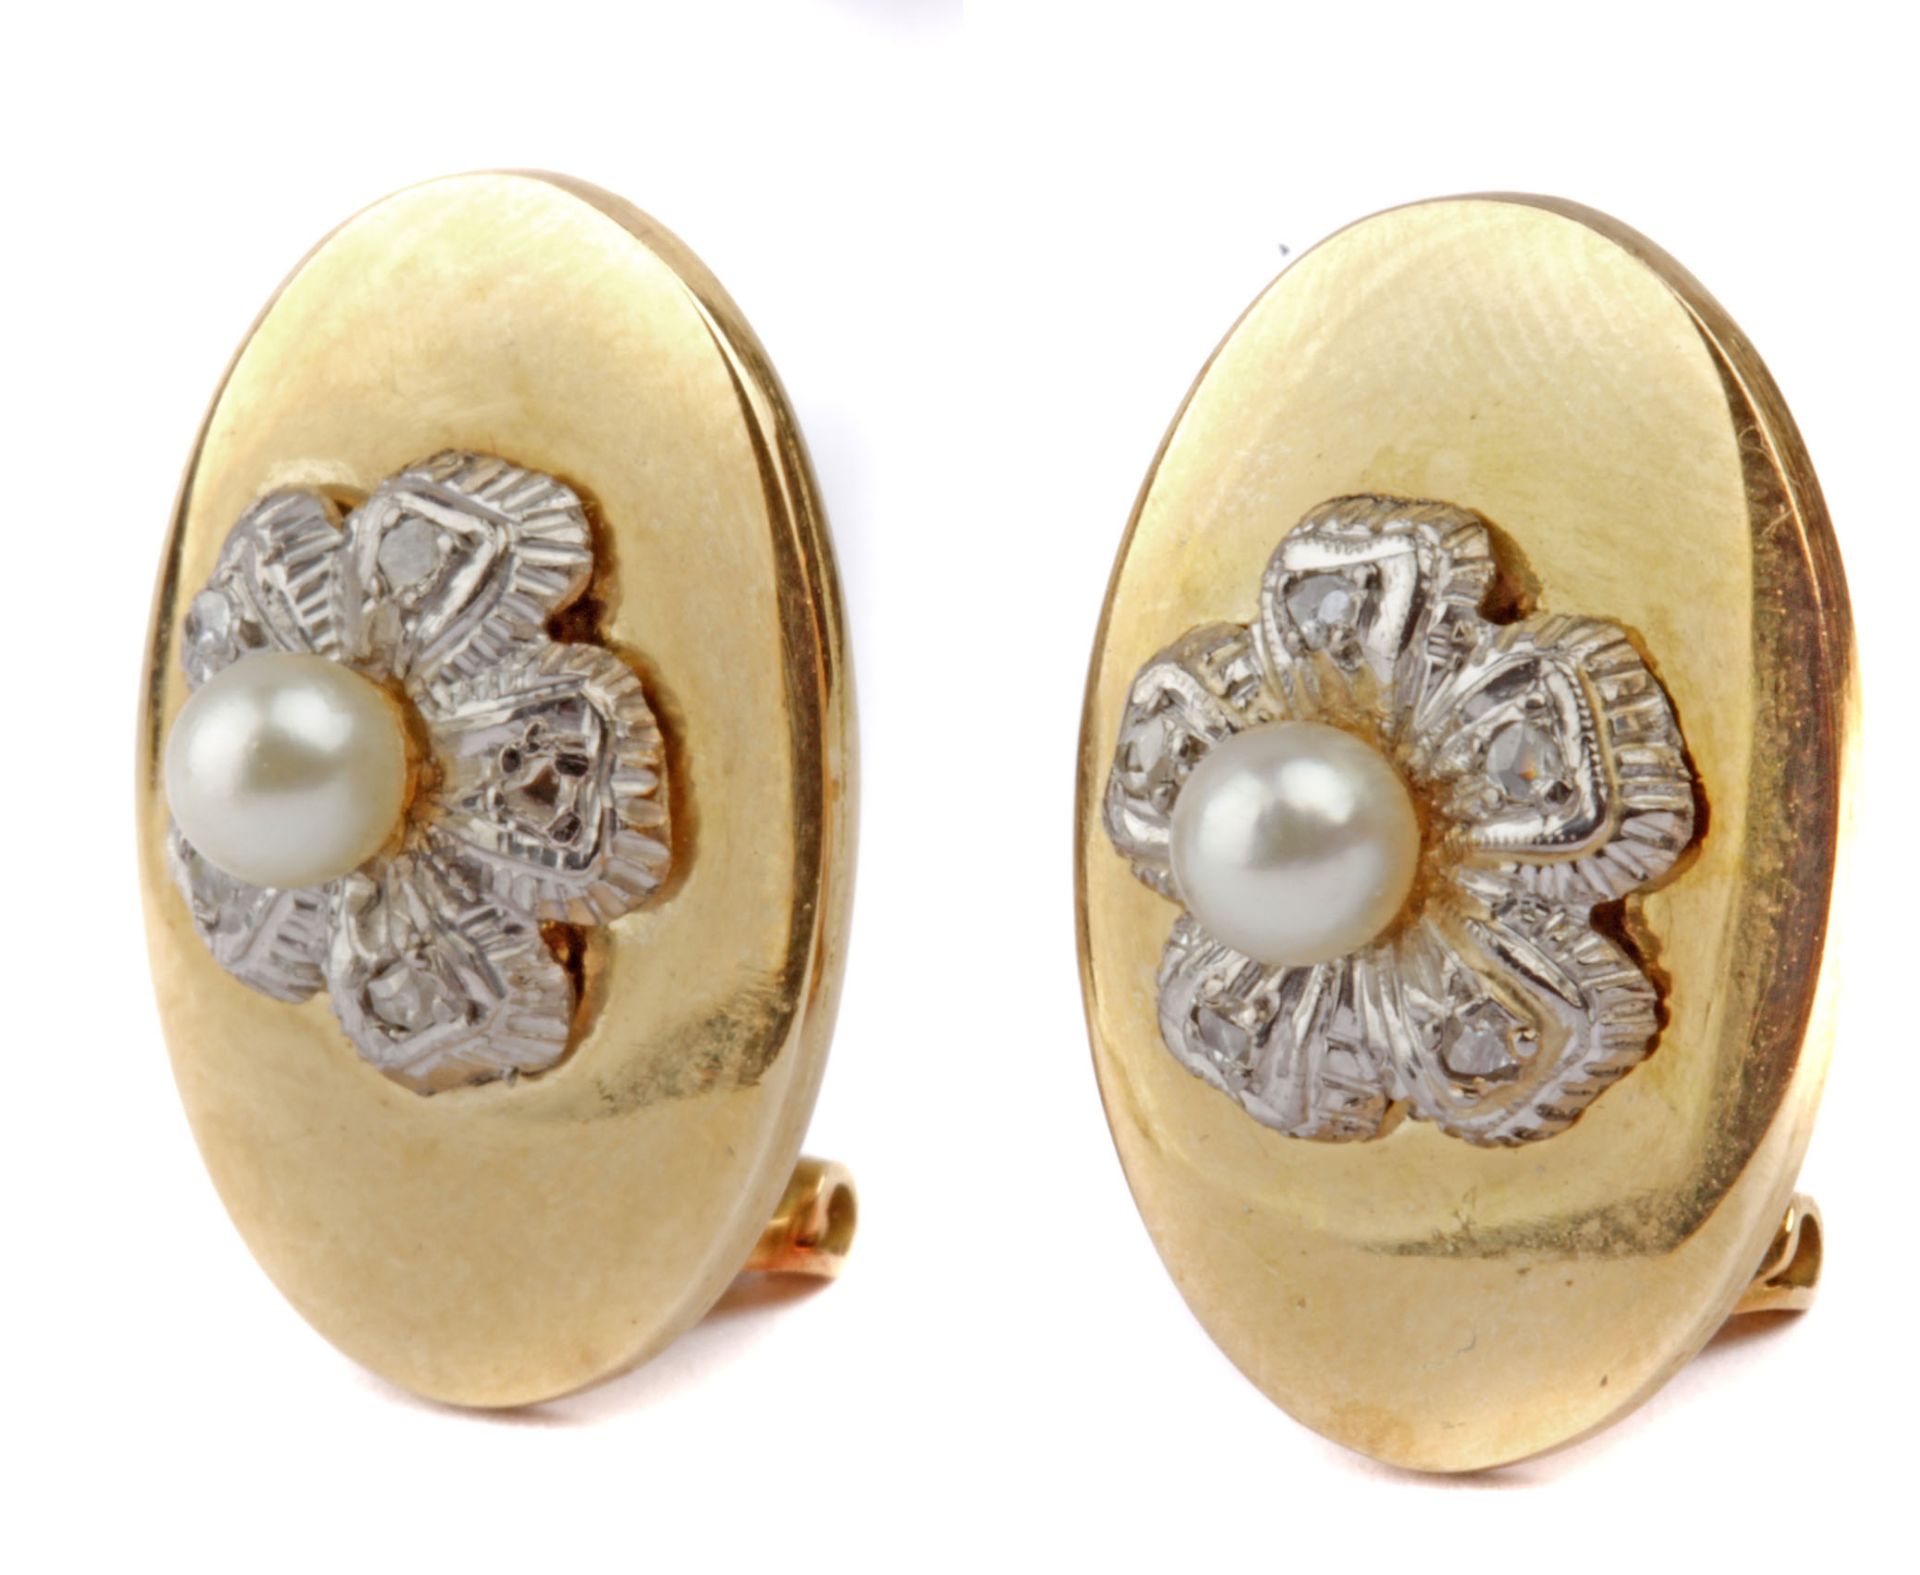 A pair of rose cut and pearl earrings with a platinum and yellow gold setting